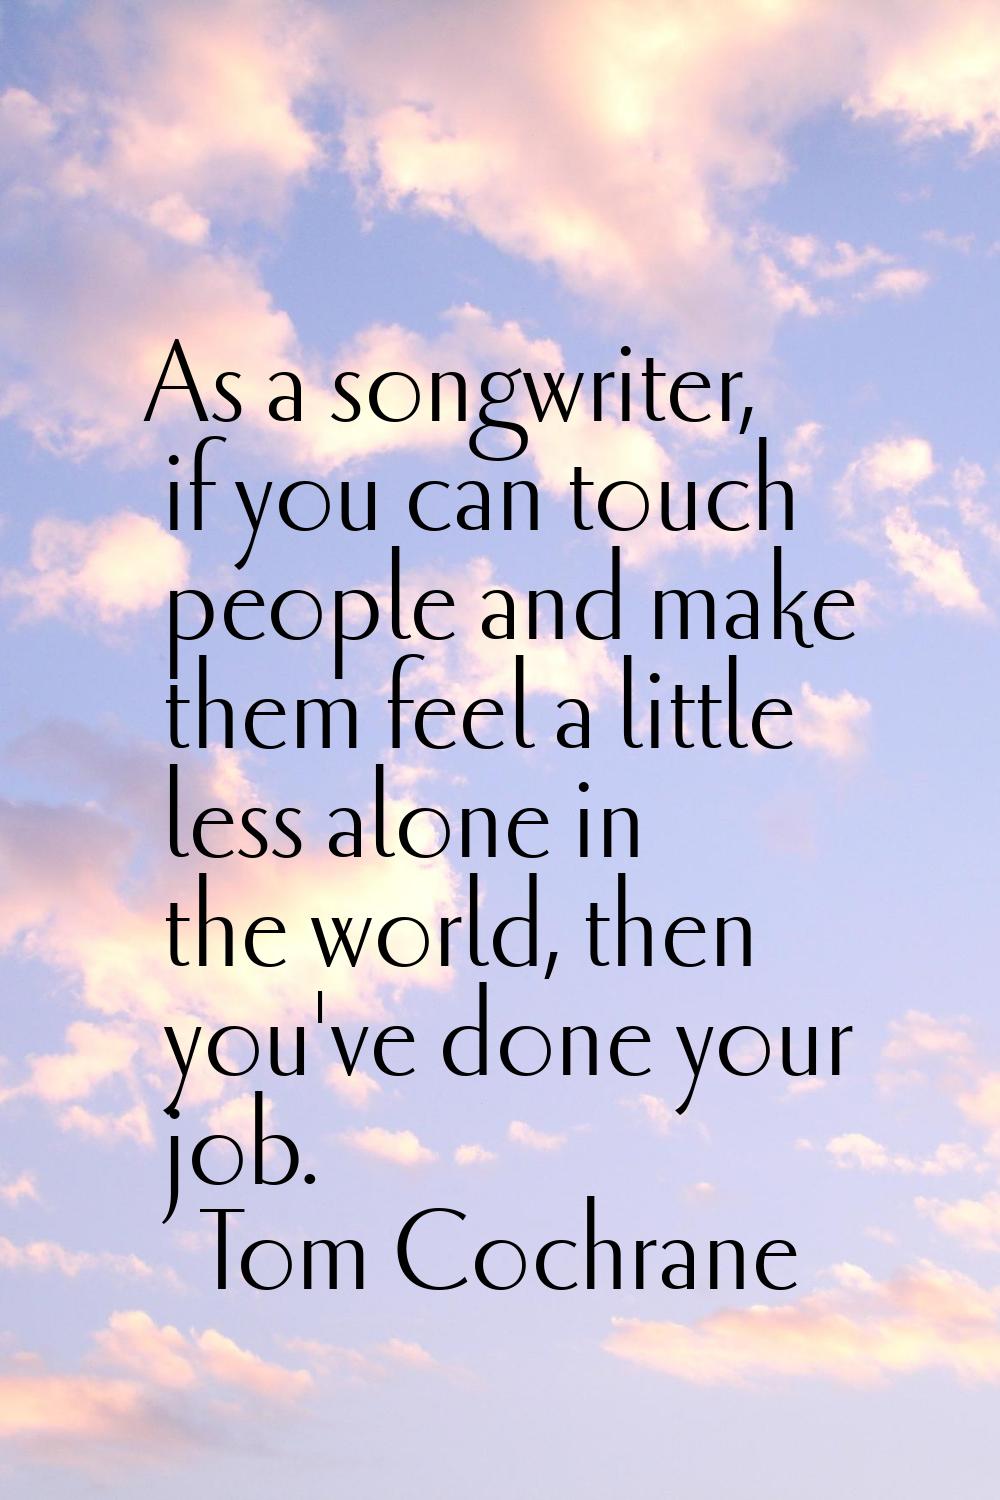 As a songwriter, if you can touch people and make them feel a little less alone in the world, then 